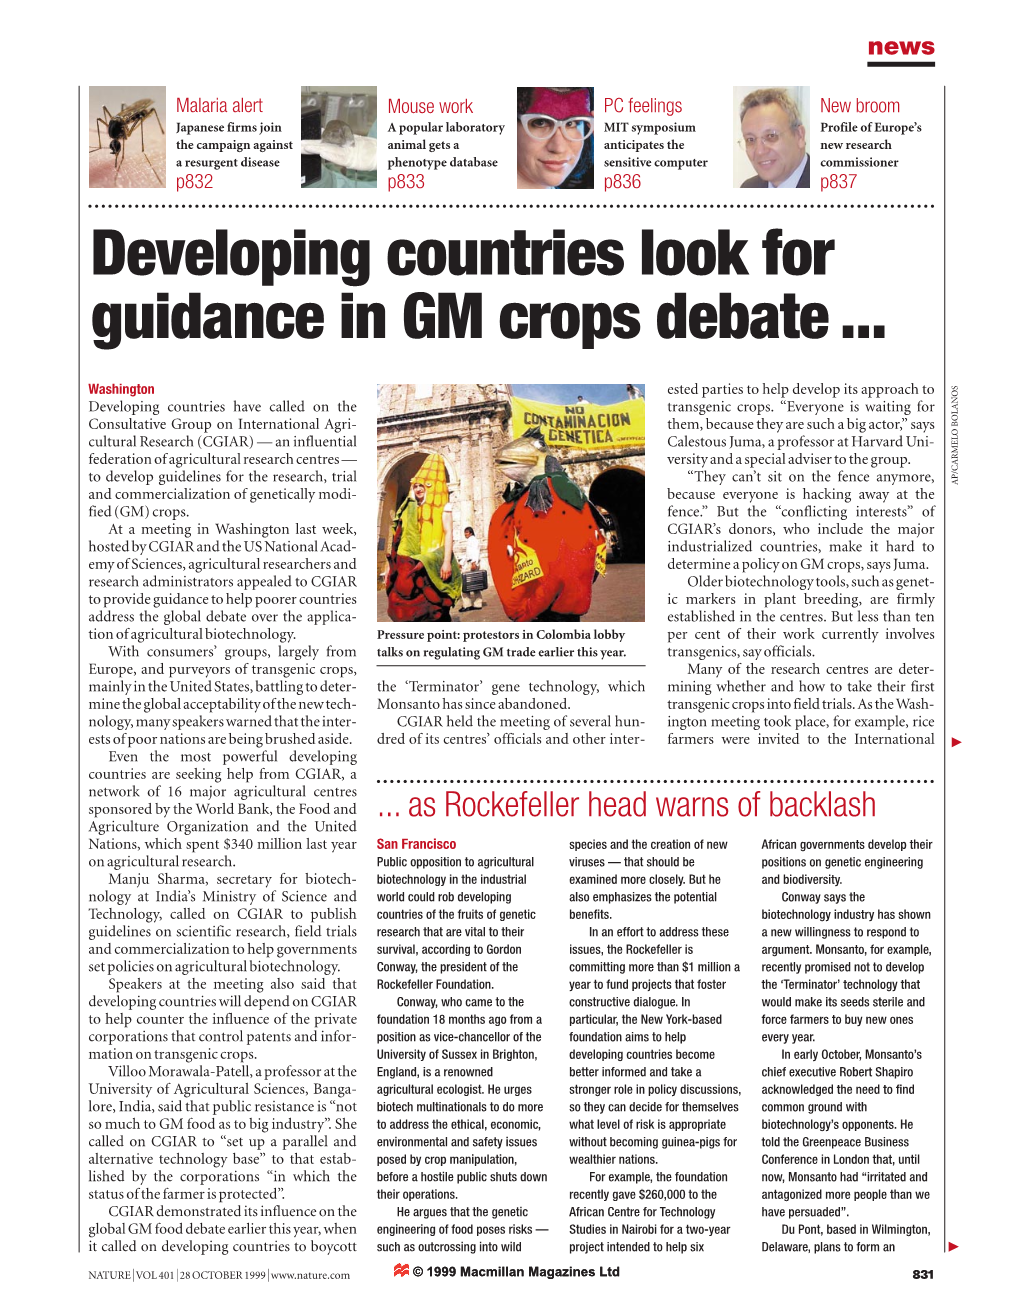 Developing Countries Look for Guidance in GM Crops Debate